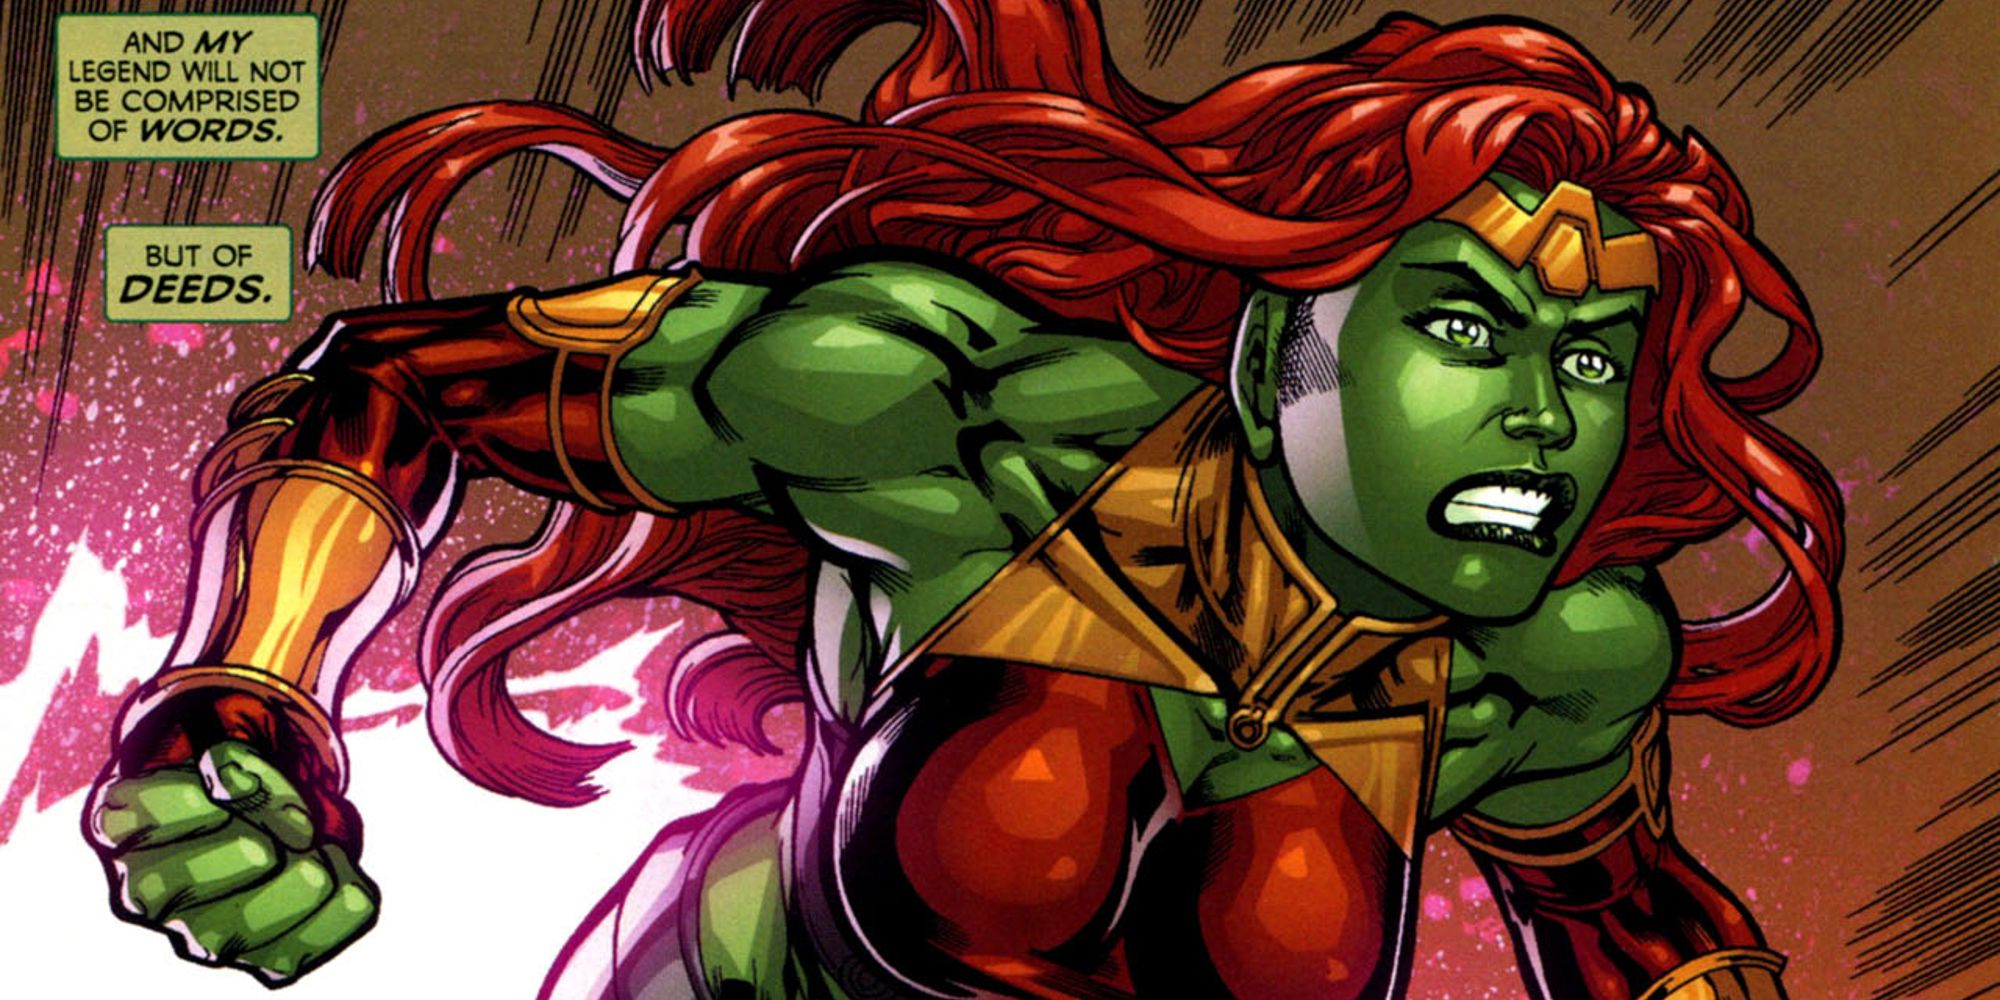 Lyra charging into battle in All-New Savage She-Hulk #4